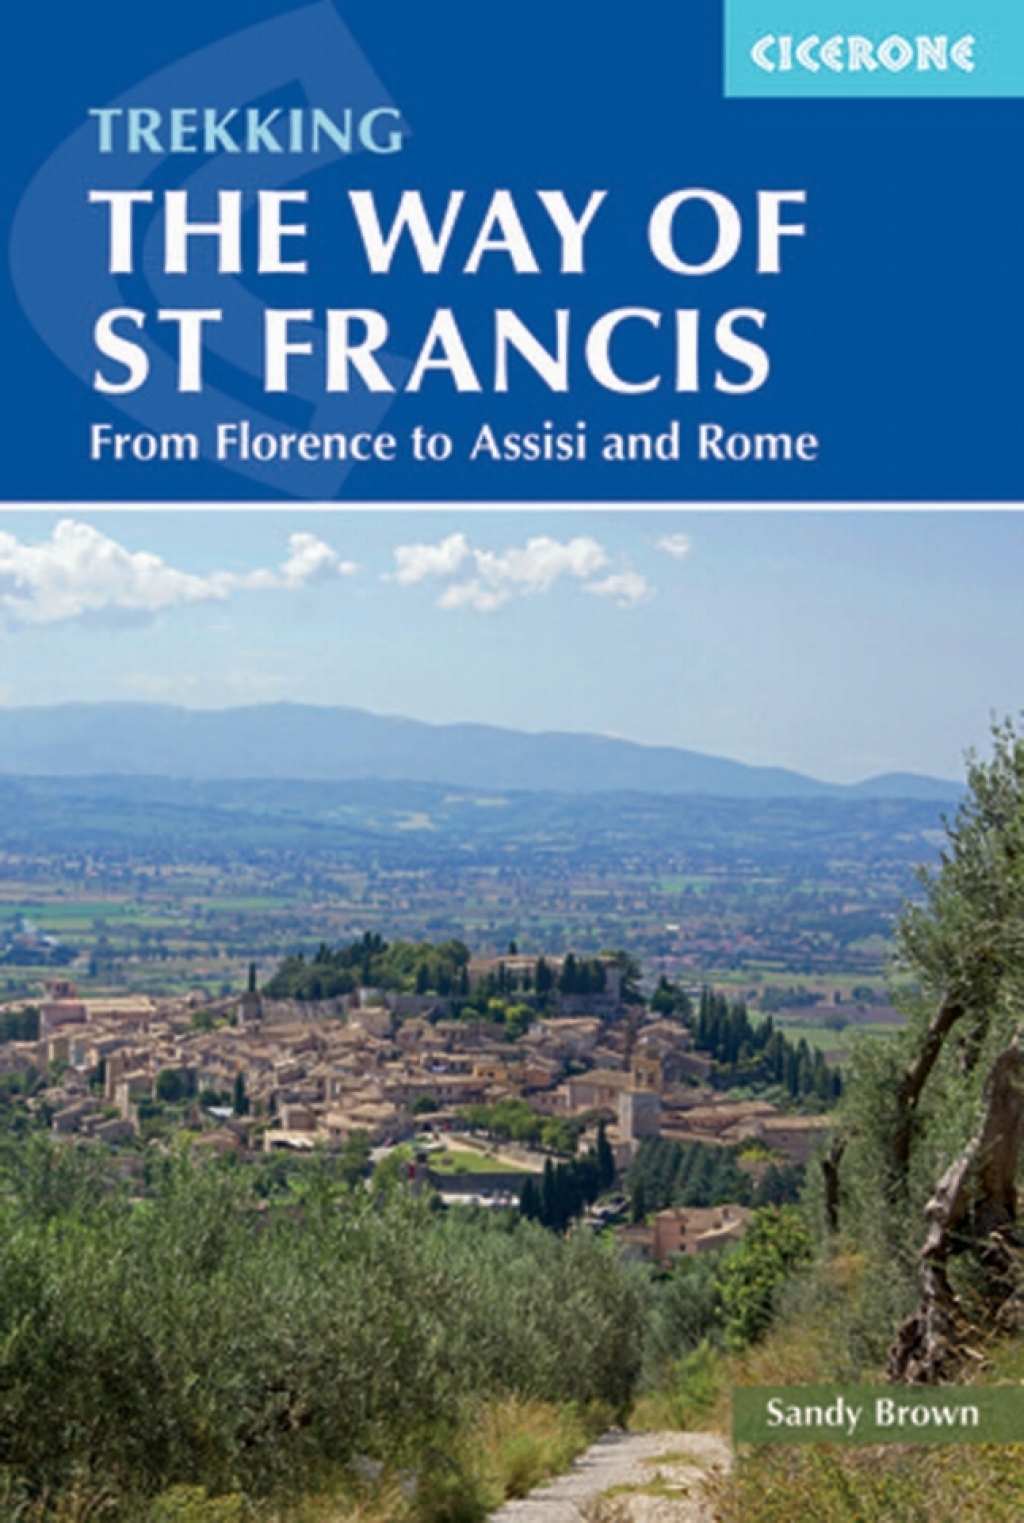 The Way of St Francis (eBook) - The Reverend Sandy Brown